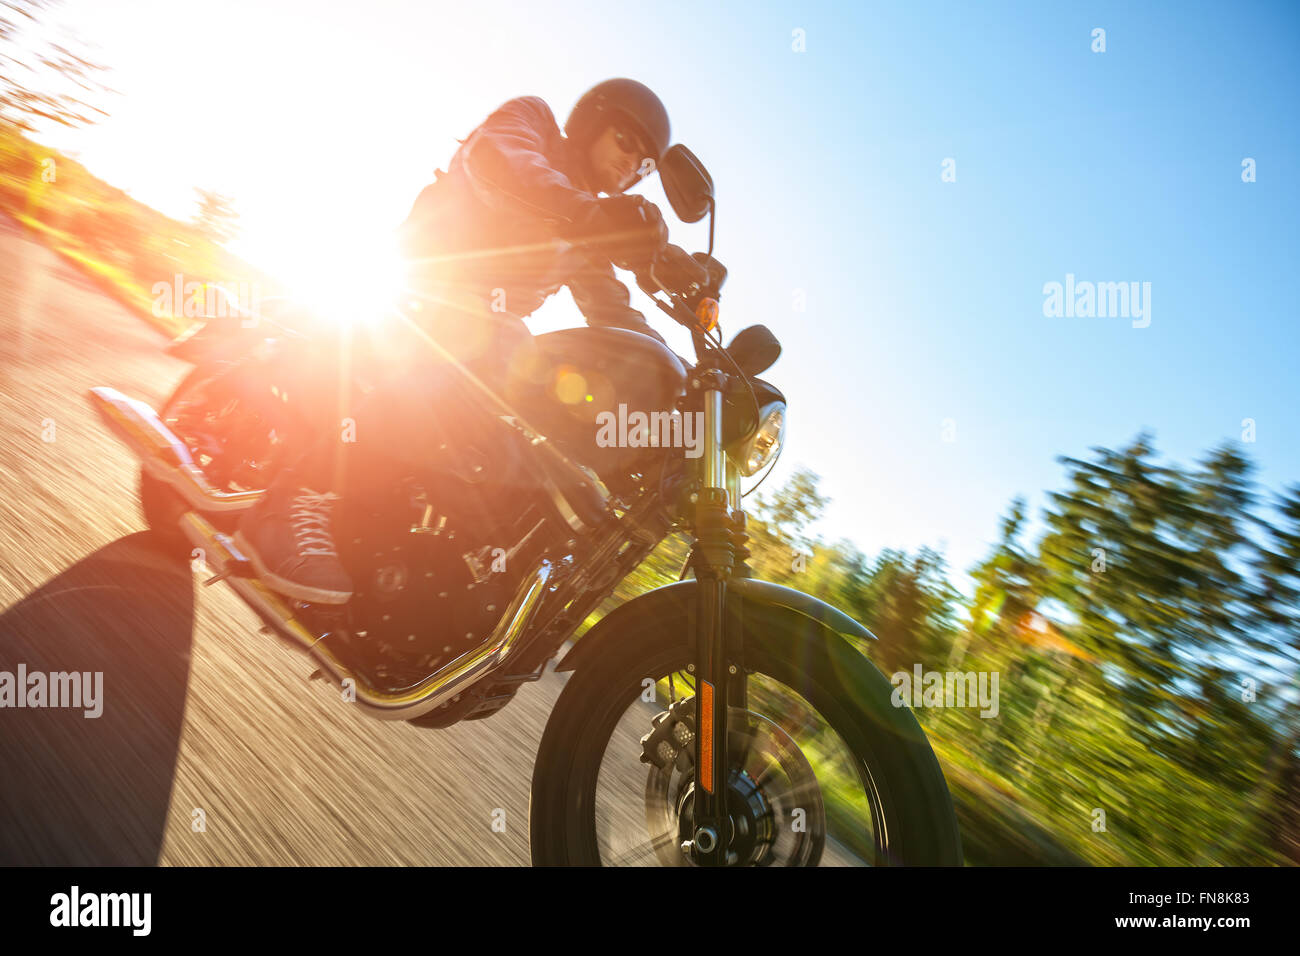 Motorcyclist riding  chopper on a road Stock Photo